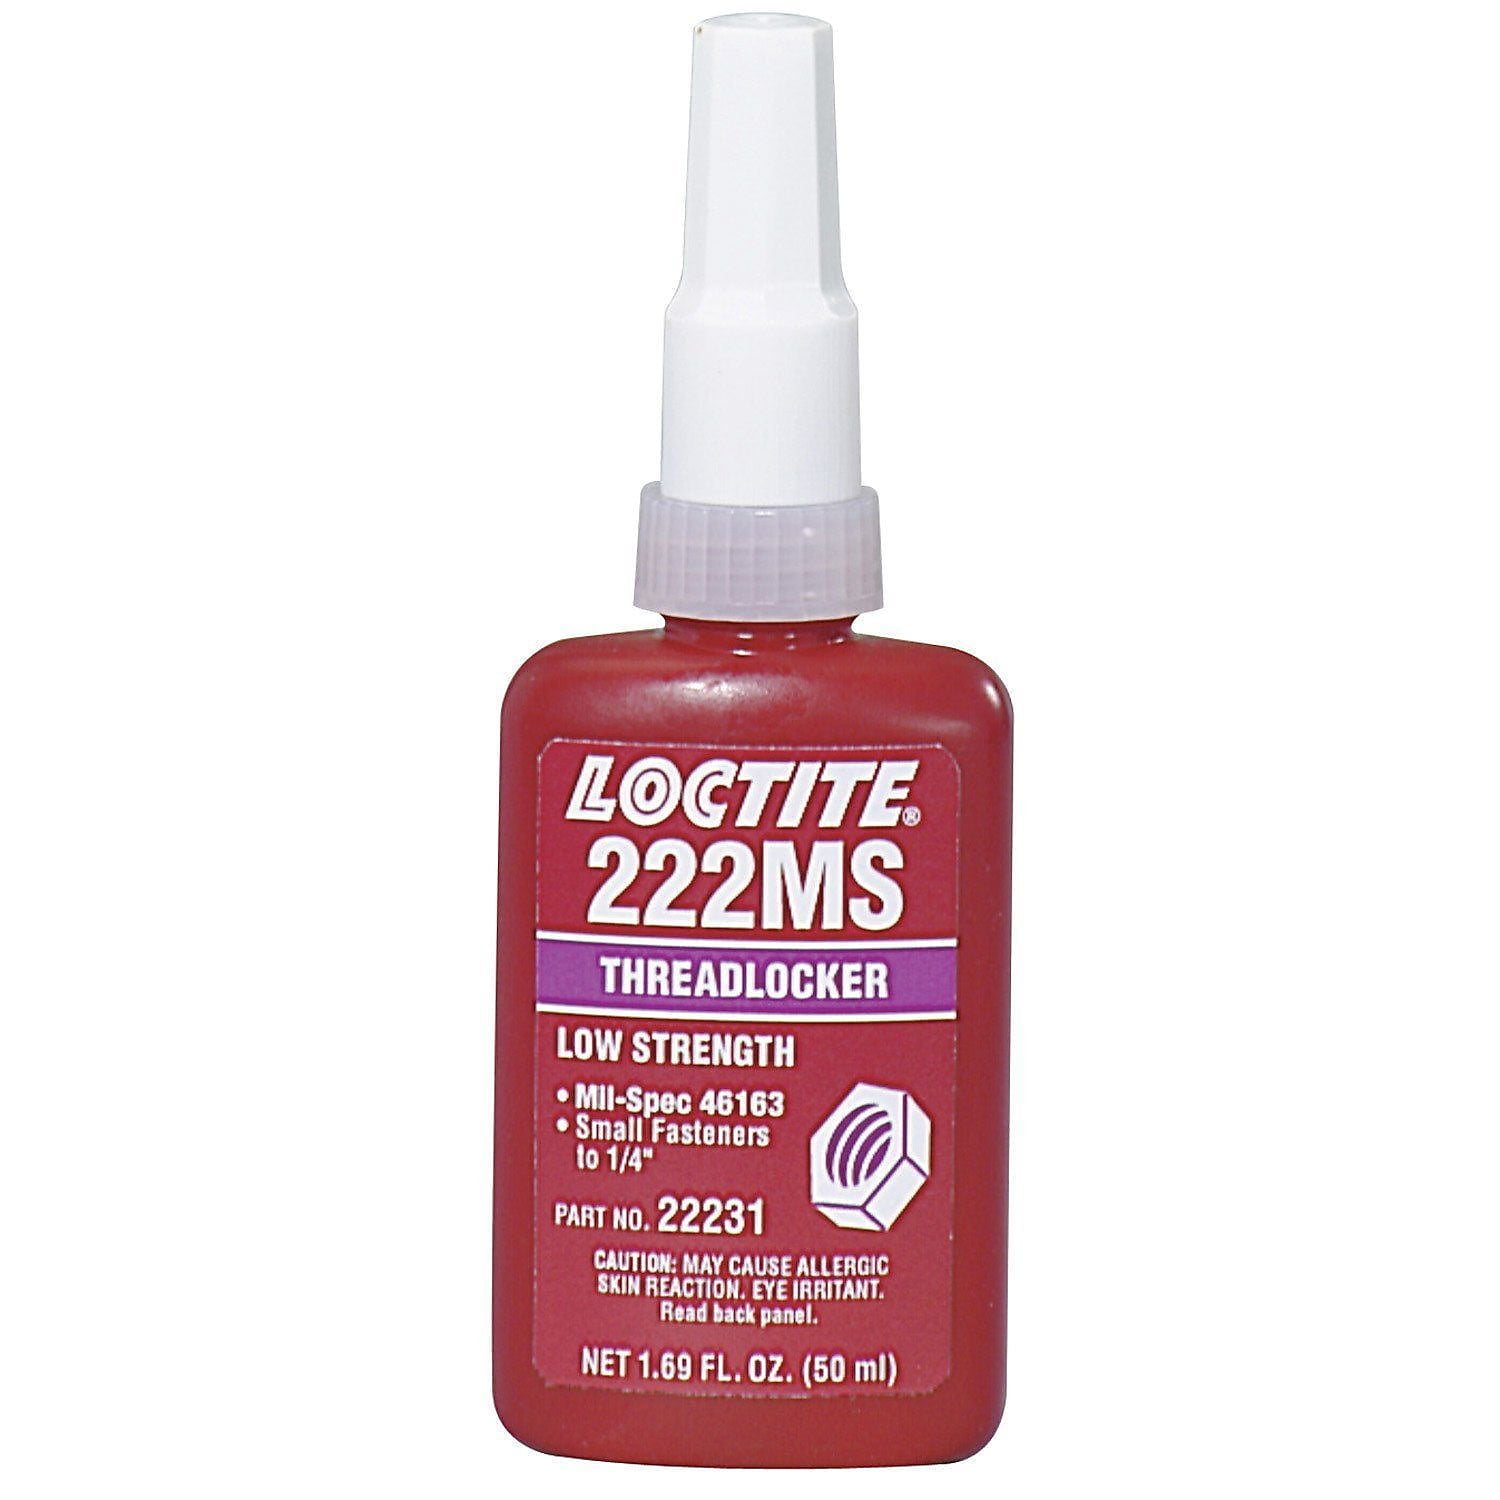 Loctite 222 50 ml purple anaerobic adhesive for metal screw threads, low  strength, easy disassembly, also for adjusting screws, prevents  self-loosening, ease disassembly with hand tools, P1 NSF approved